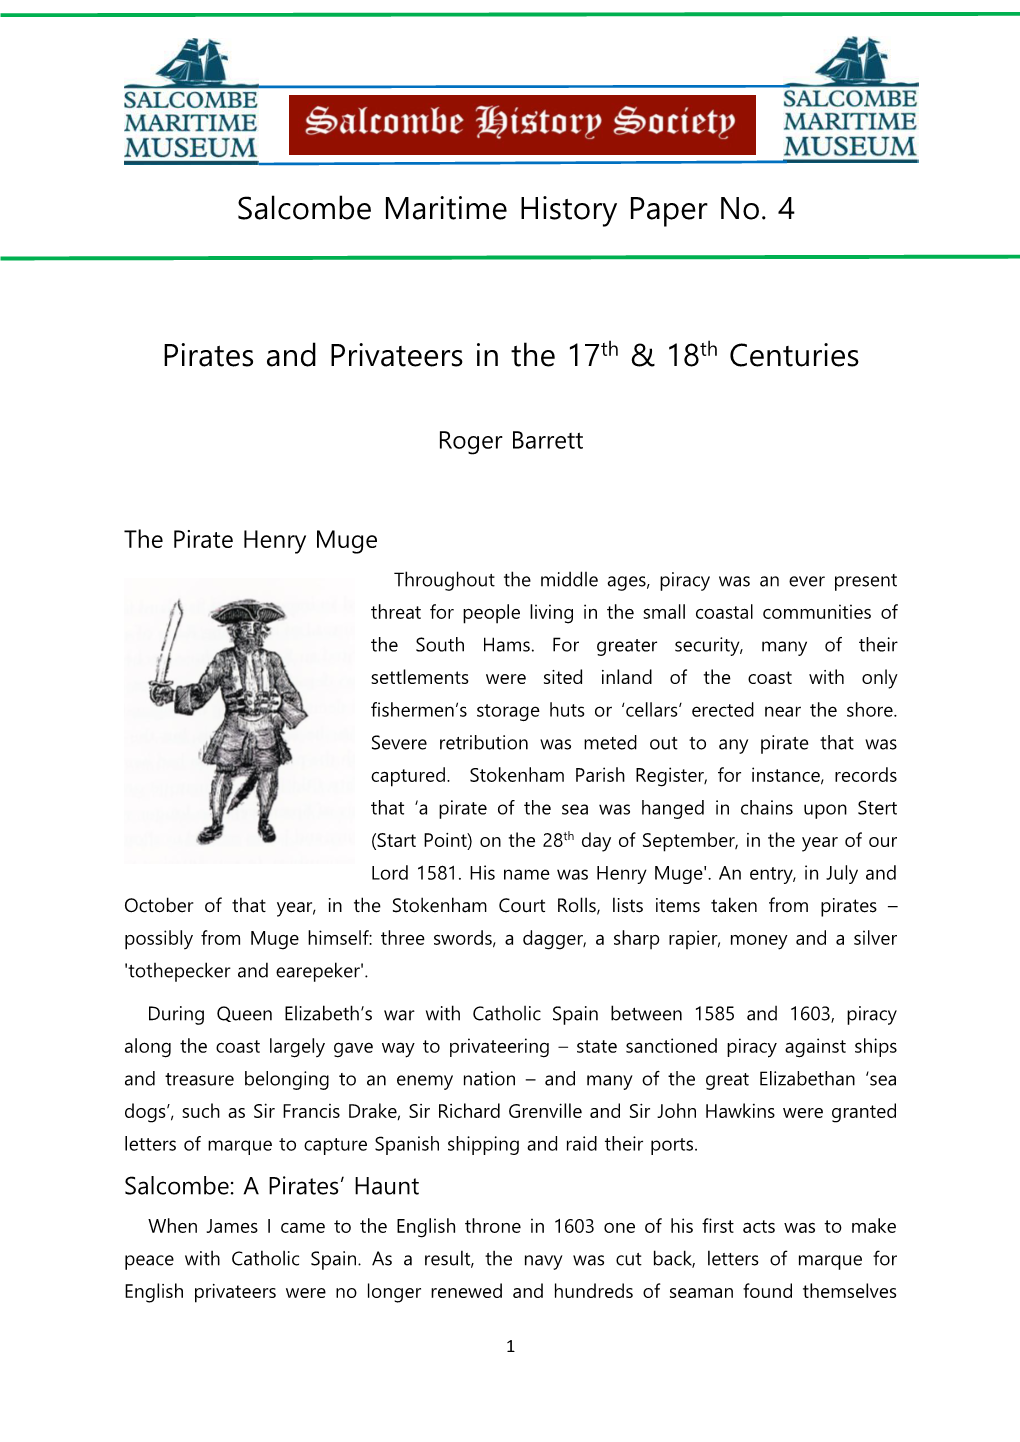 Pirates and Privateers in the 17Th & 18Th Centuries Salcombe Maritime